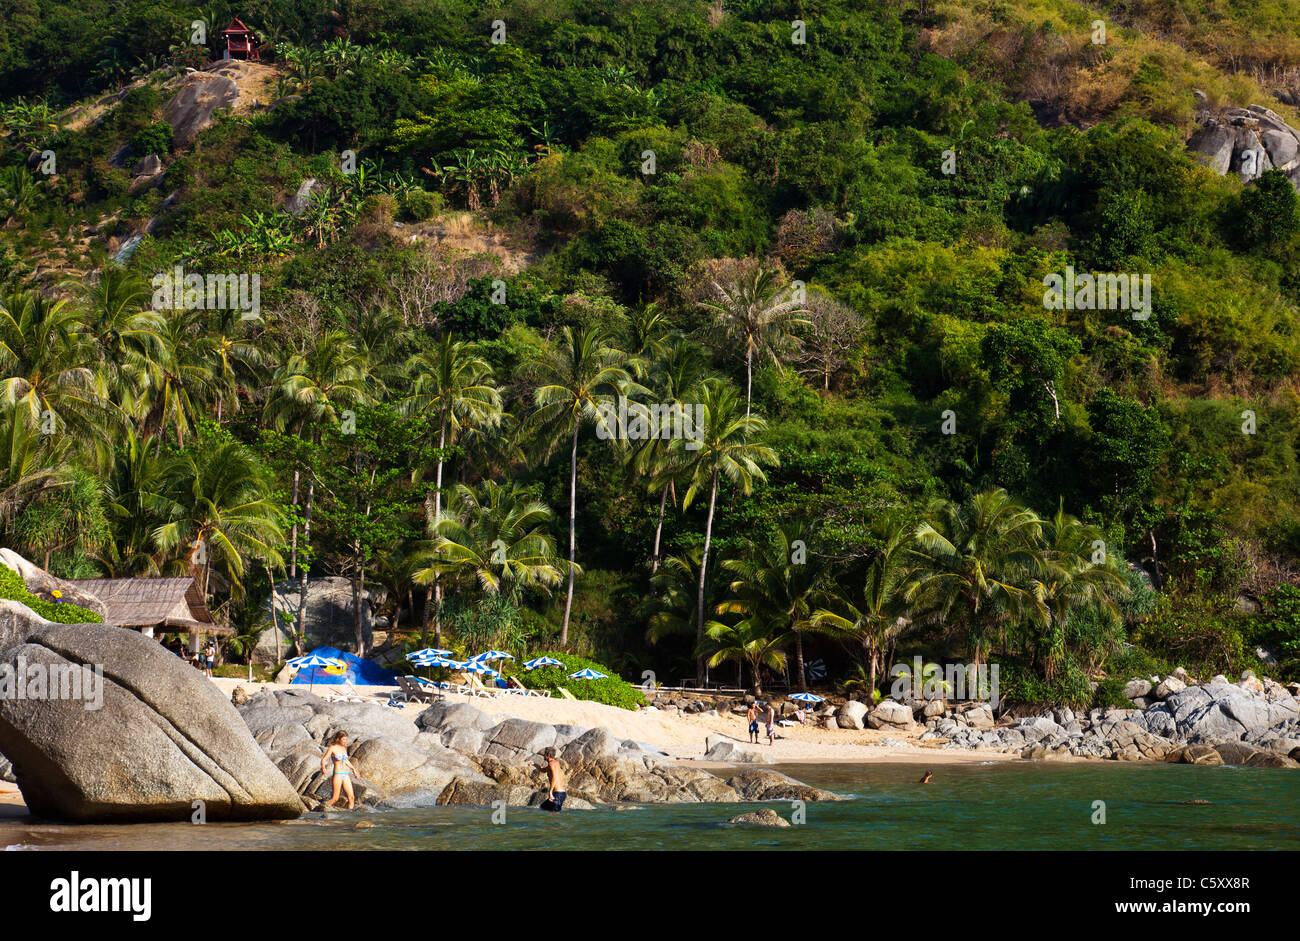 View onto Paradise Beach with rocks and people. Stock Photo